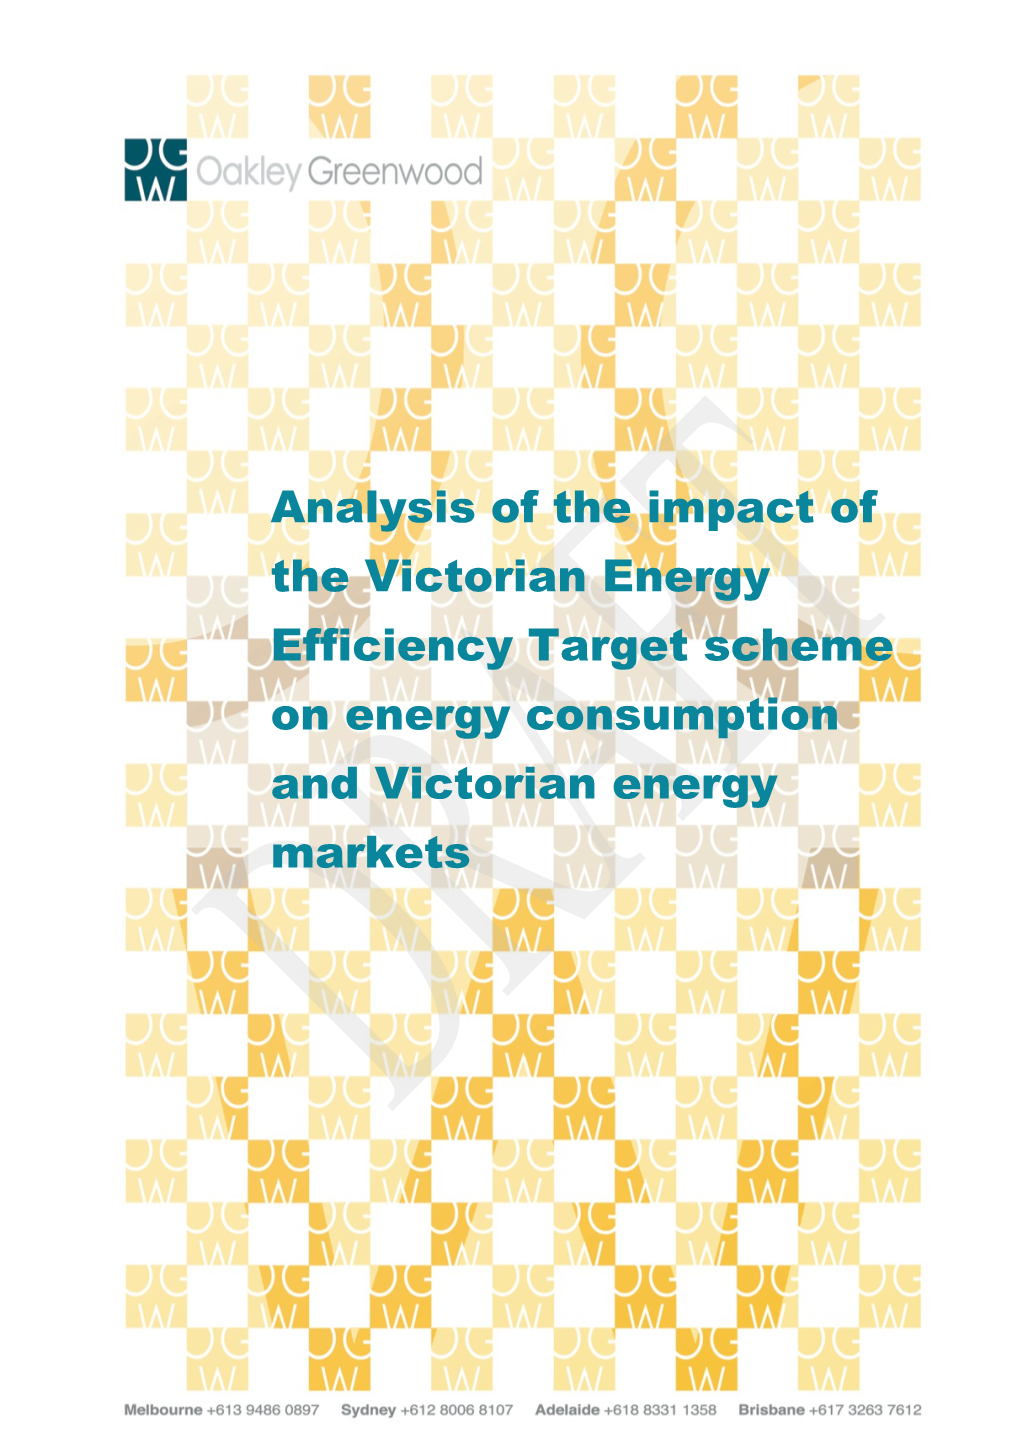 Analysis of the Impact of the Victorian Energy Efficiency Target Scheme on Energy Consumption